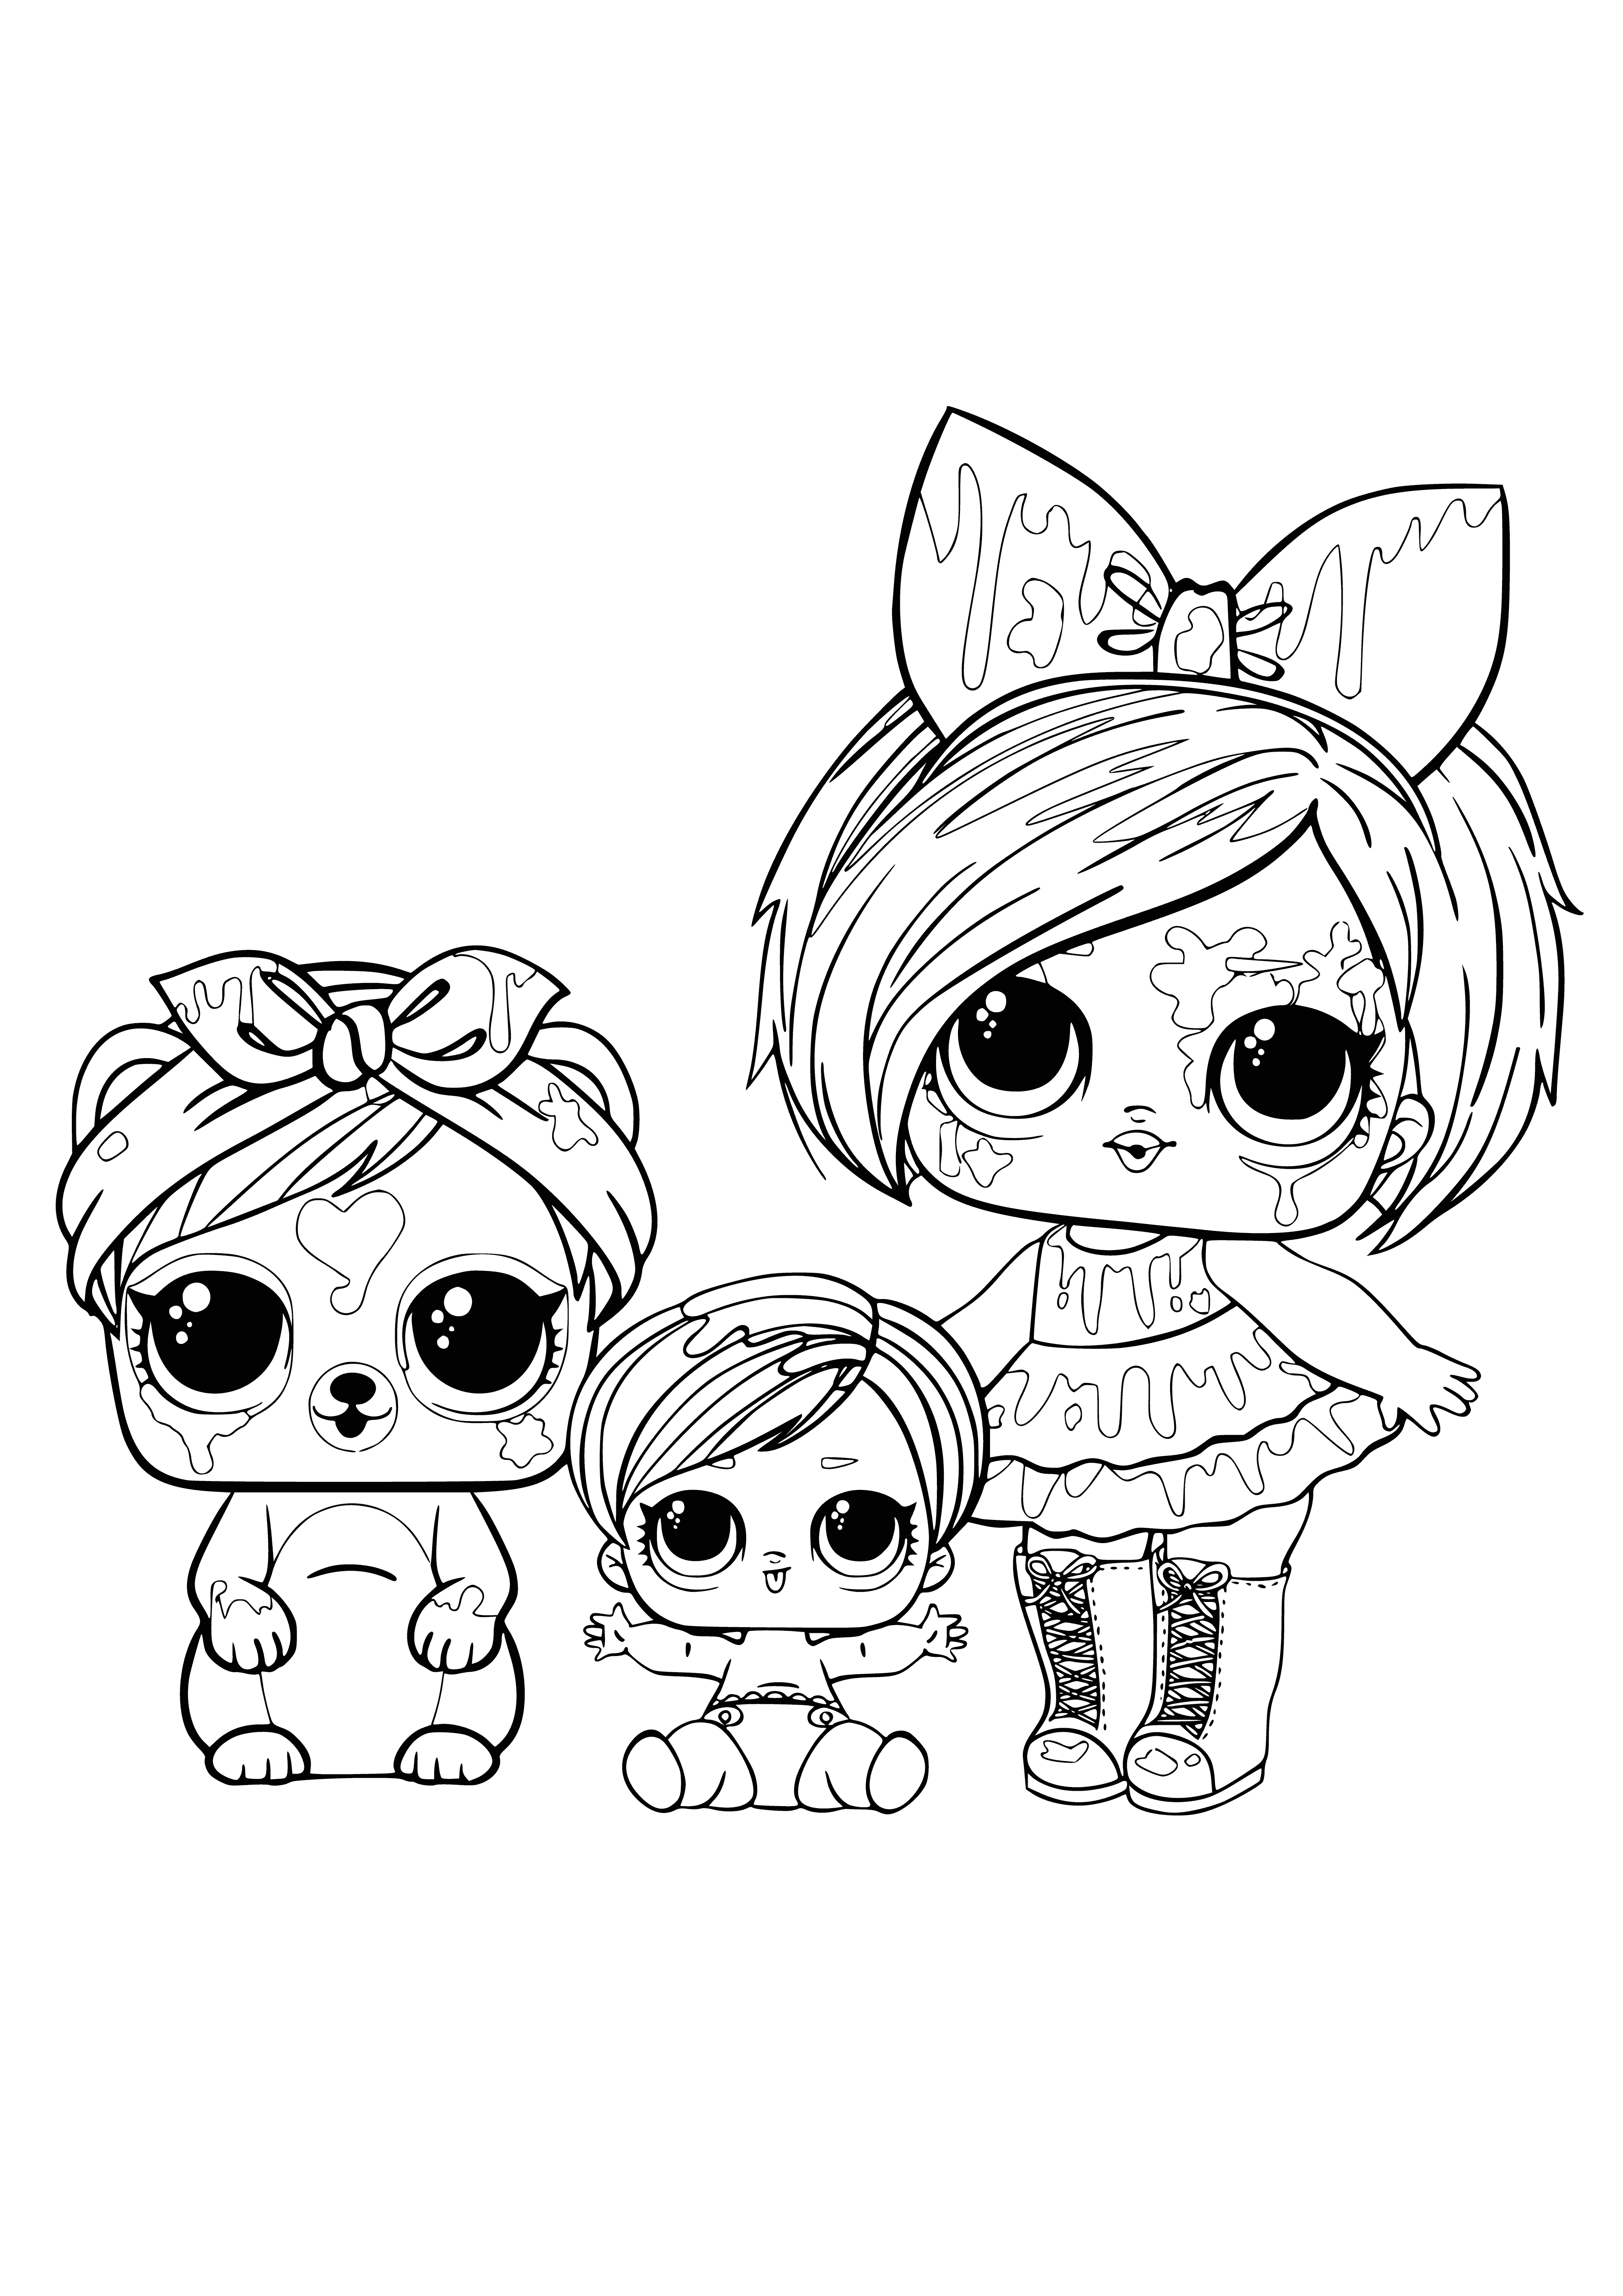 LOL Spray with baby and pet coloring page